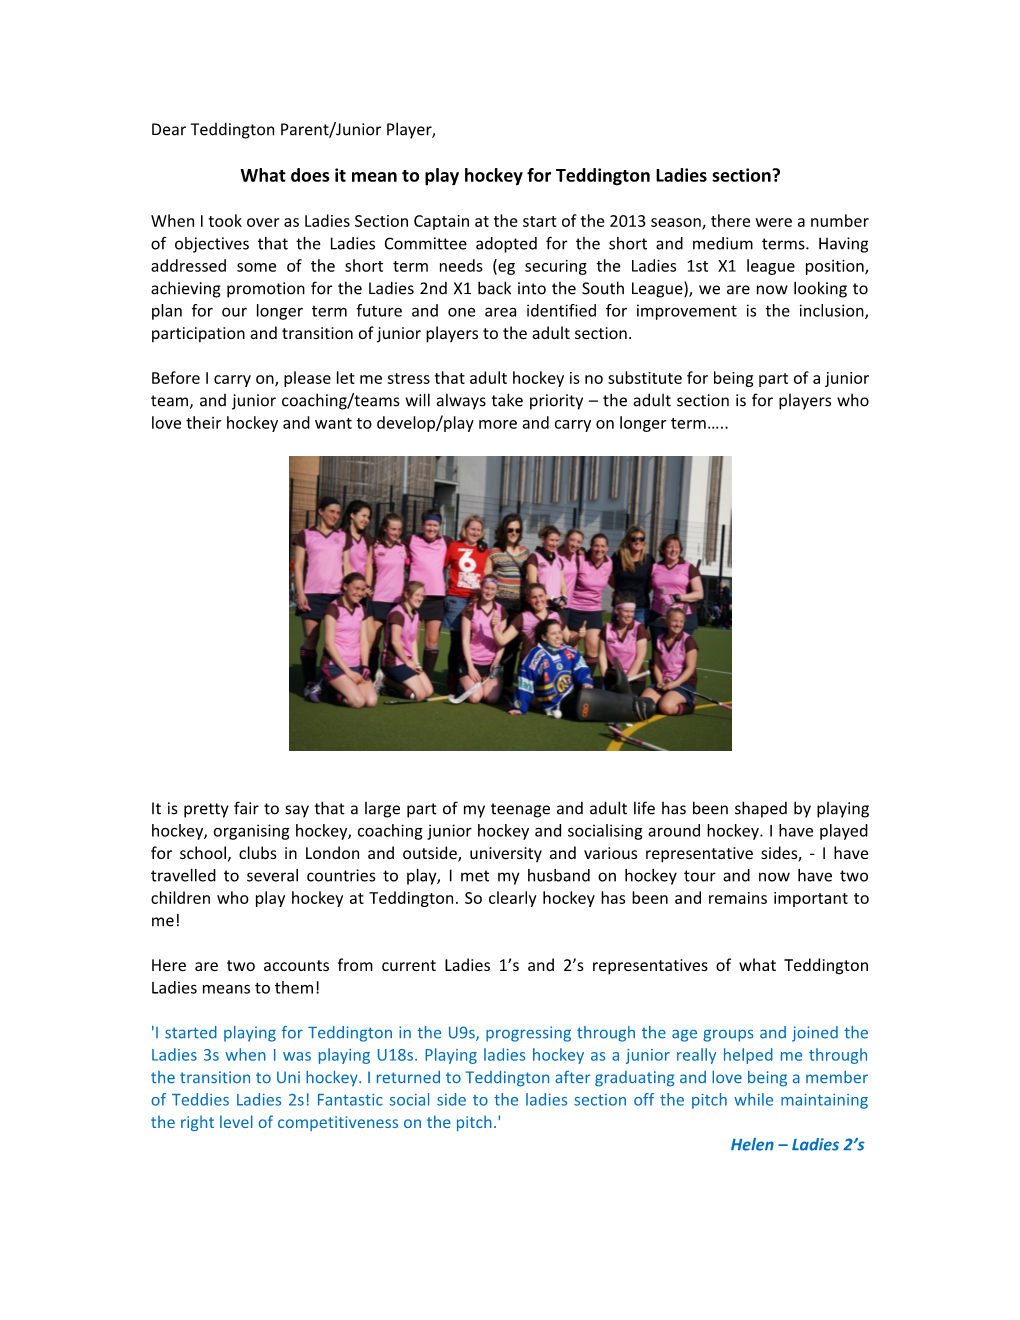 What Does It Mean to Play Hockey for Teddington Ladies Section?